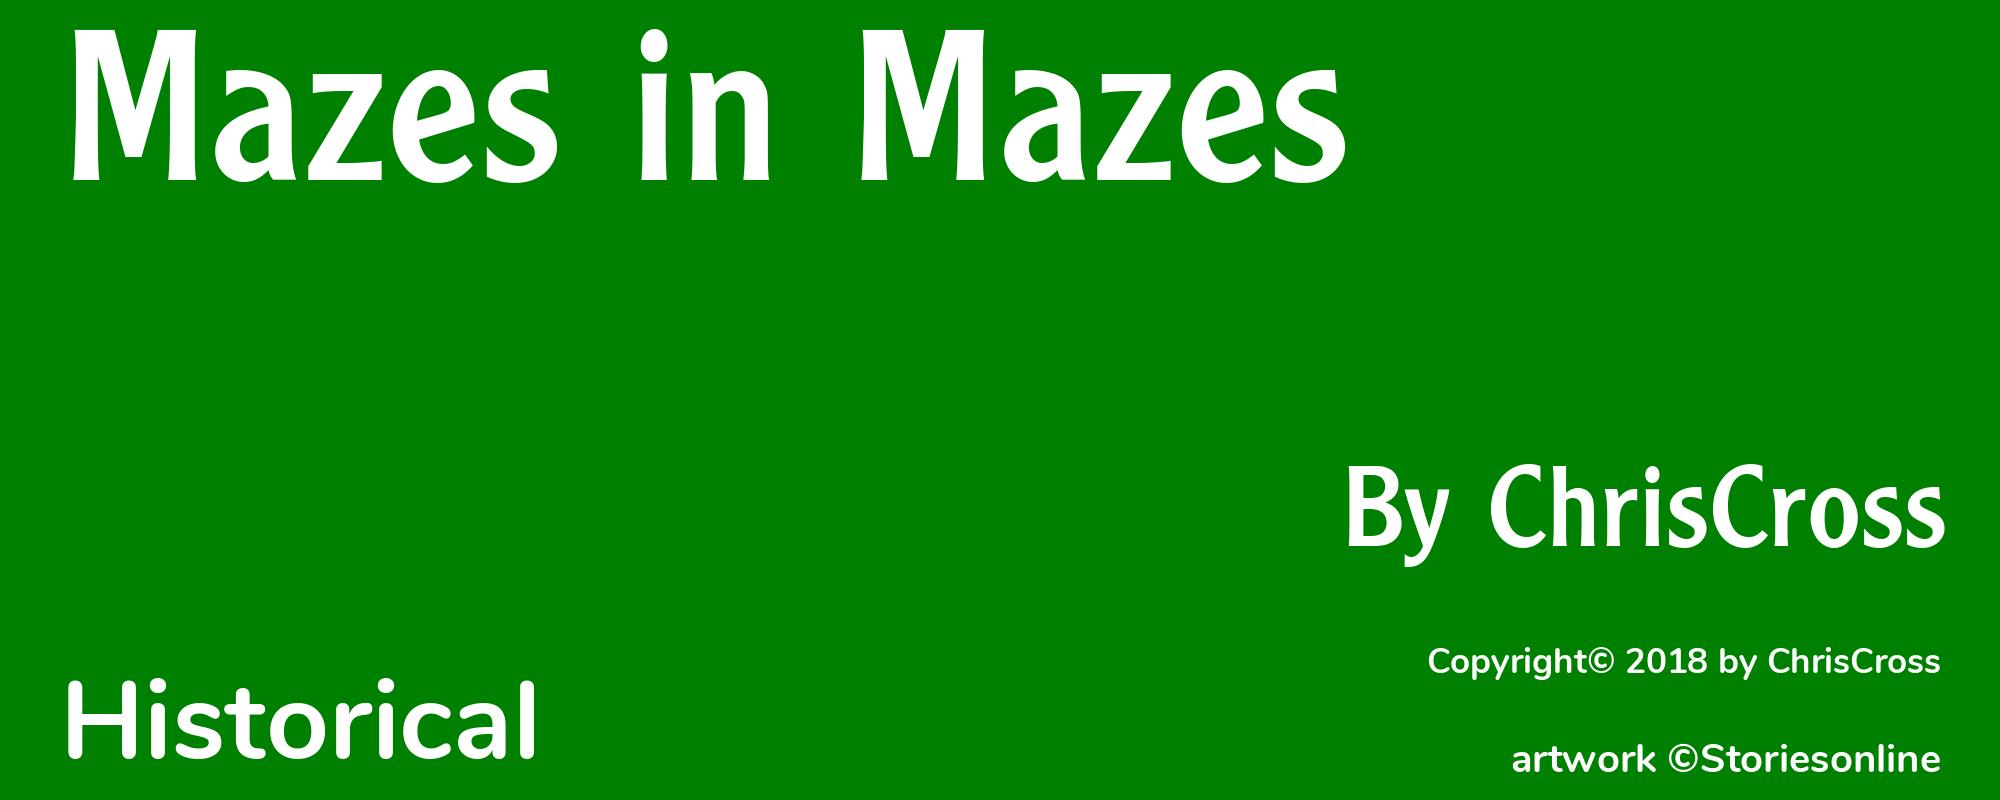 Mazes in Mazes - Cover